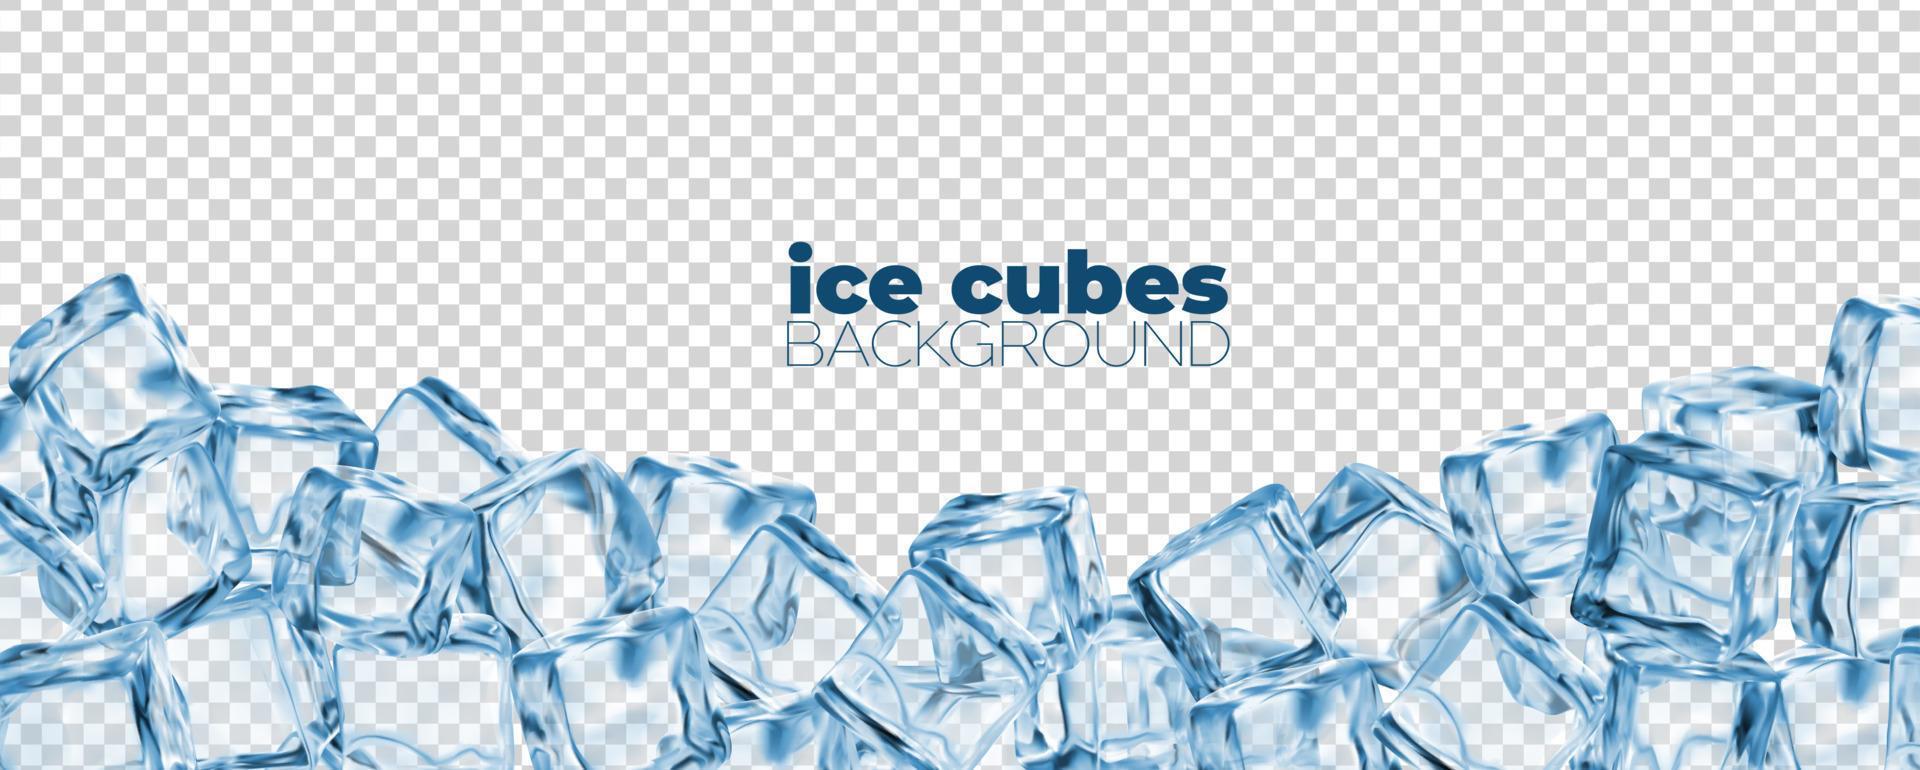 Realistic blue ice crystal cubes vector background